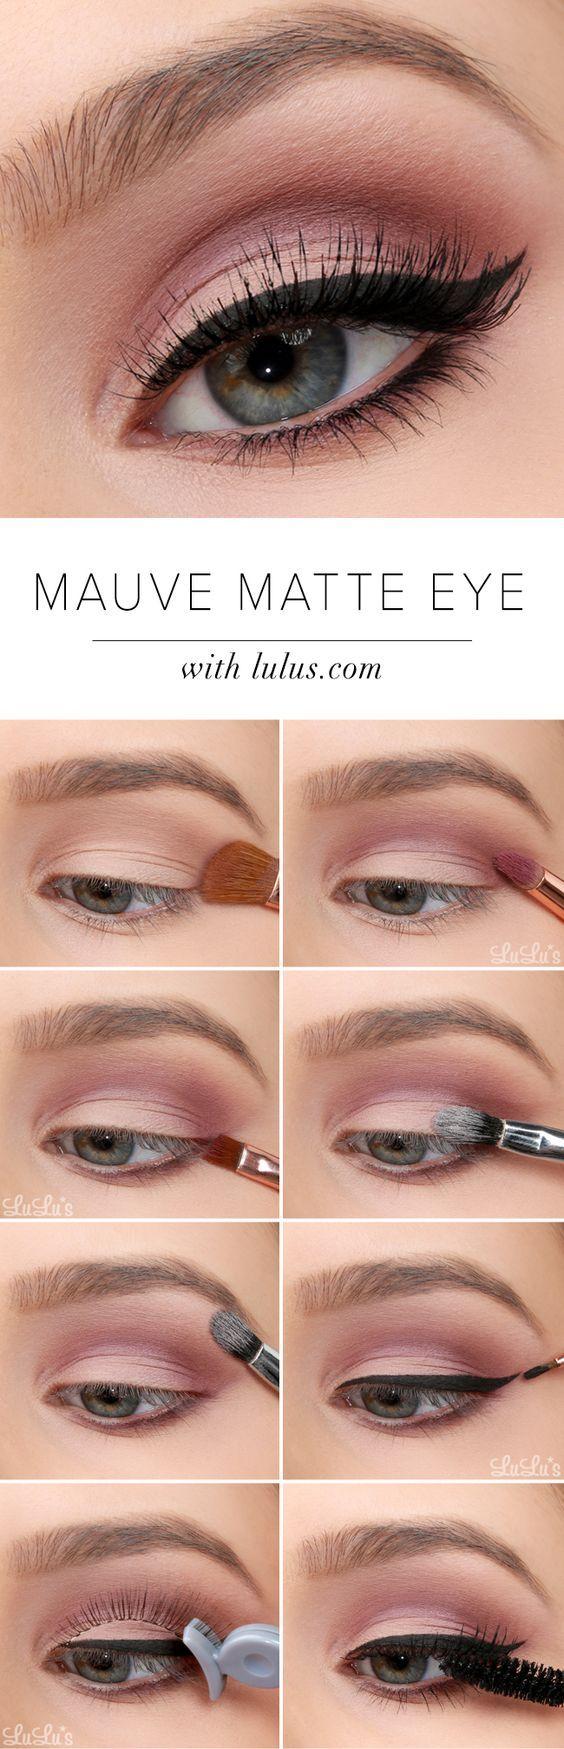 Wedding - 15 Makeup Tutorials You Can Try This Season